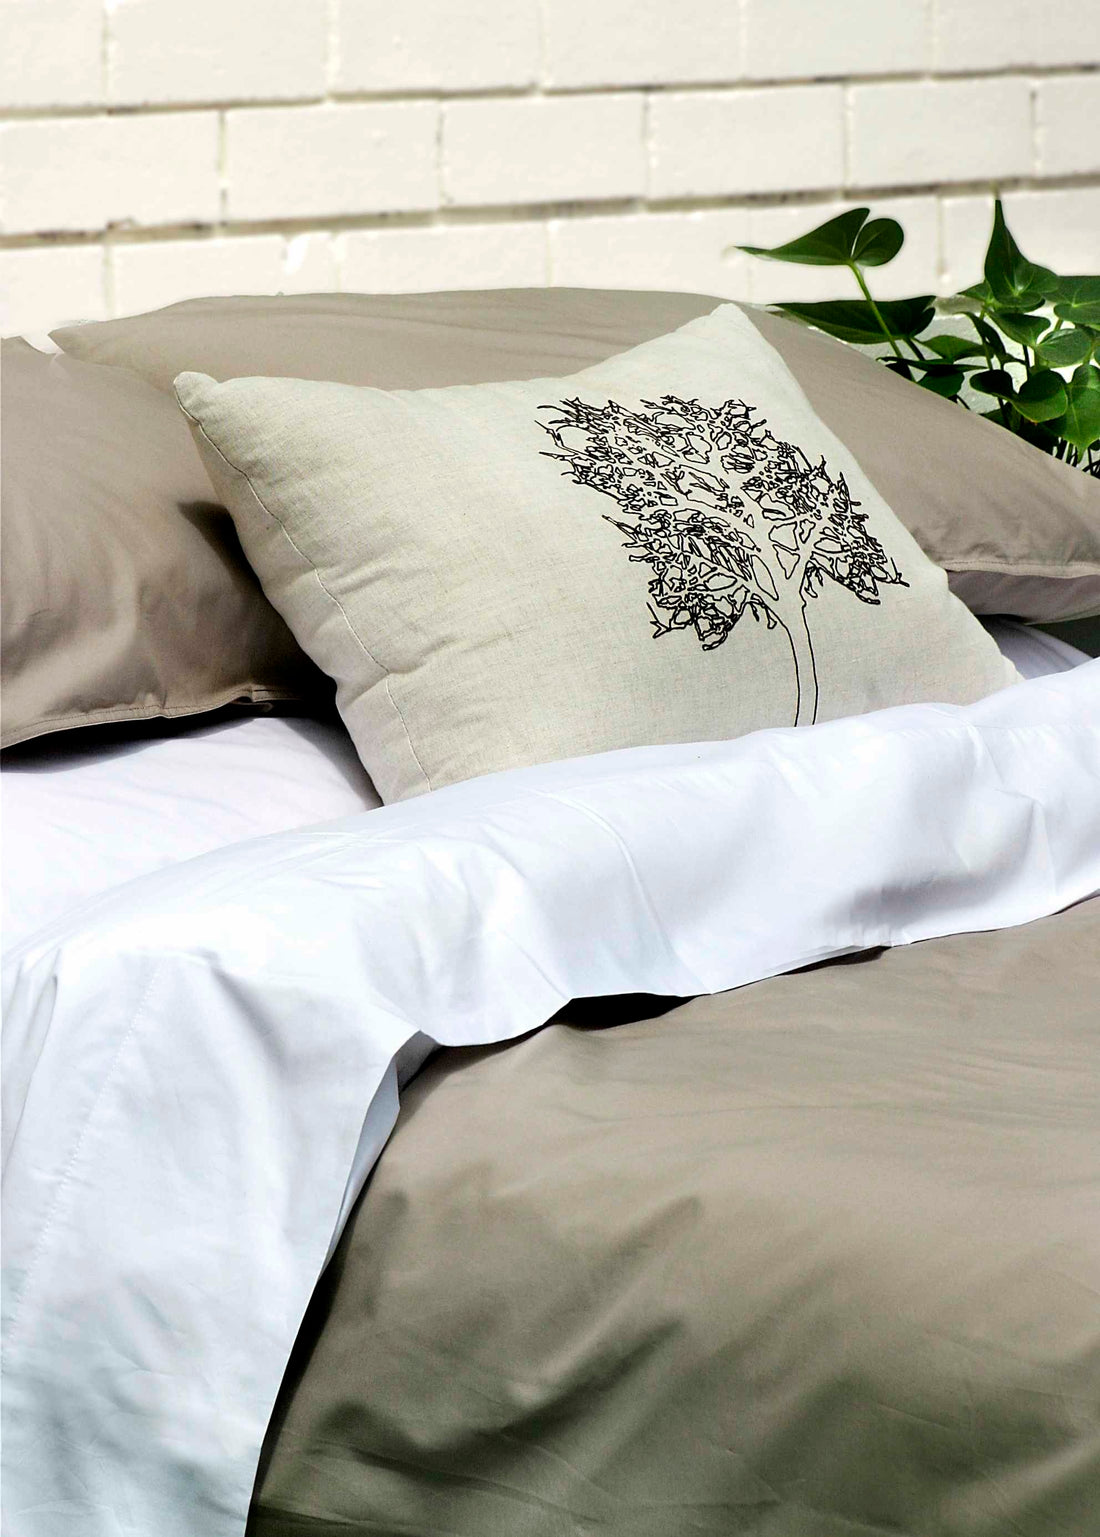 Transform Your Home into a Healthier Oasis with Organic Bedding